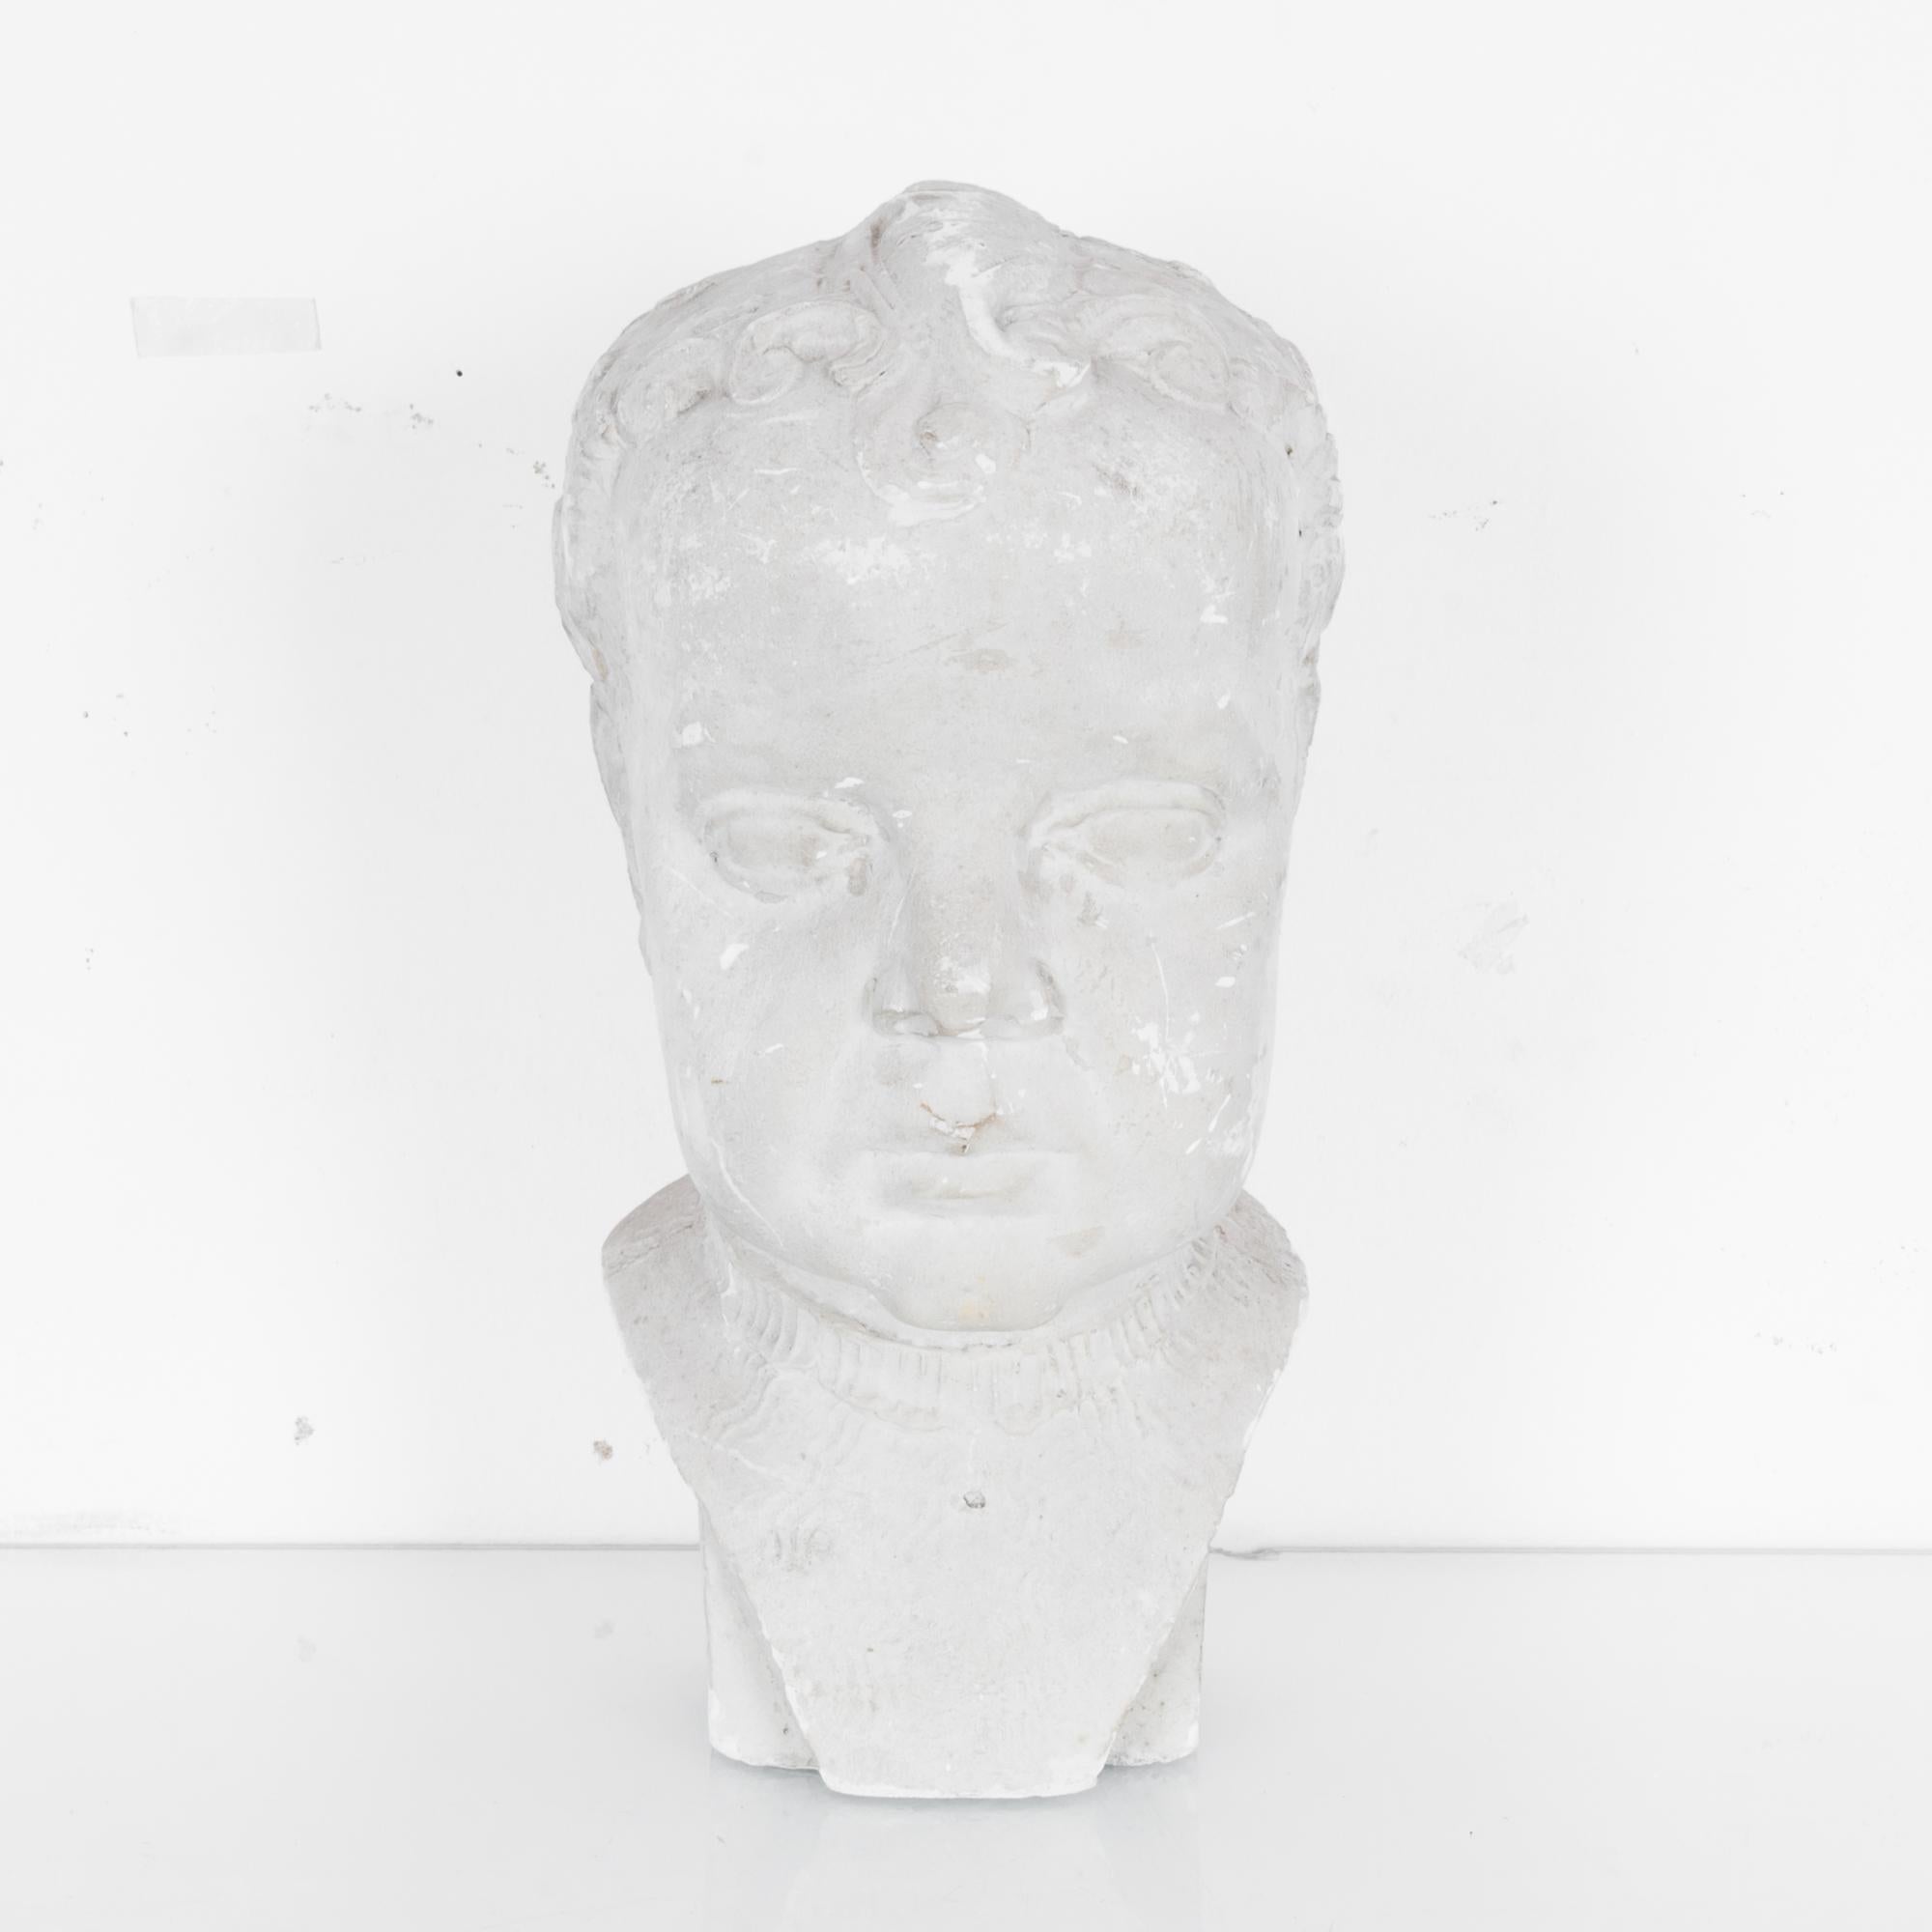 This plaster of a young child was made in France, circa 1900. The sculpture is glazed and shows the child looking straight ahead with curled hair and softly rounded cheeks. With its classical style, this work of art will certainly add elegance and a